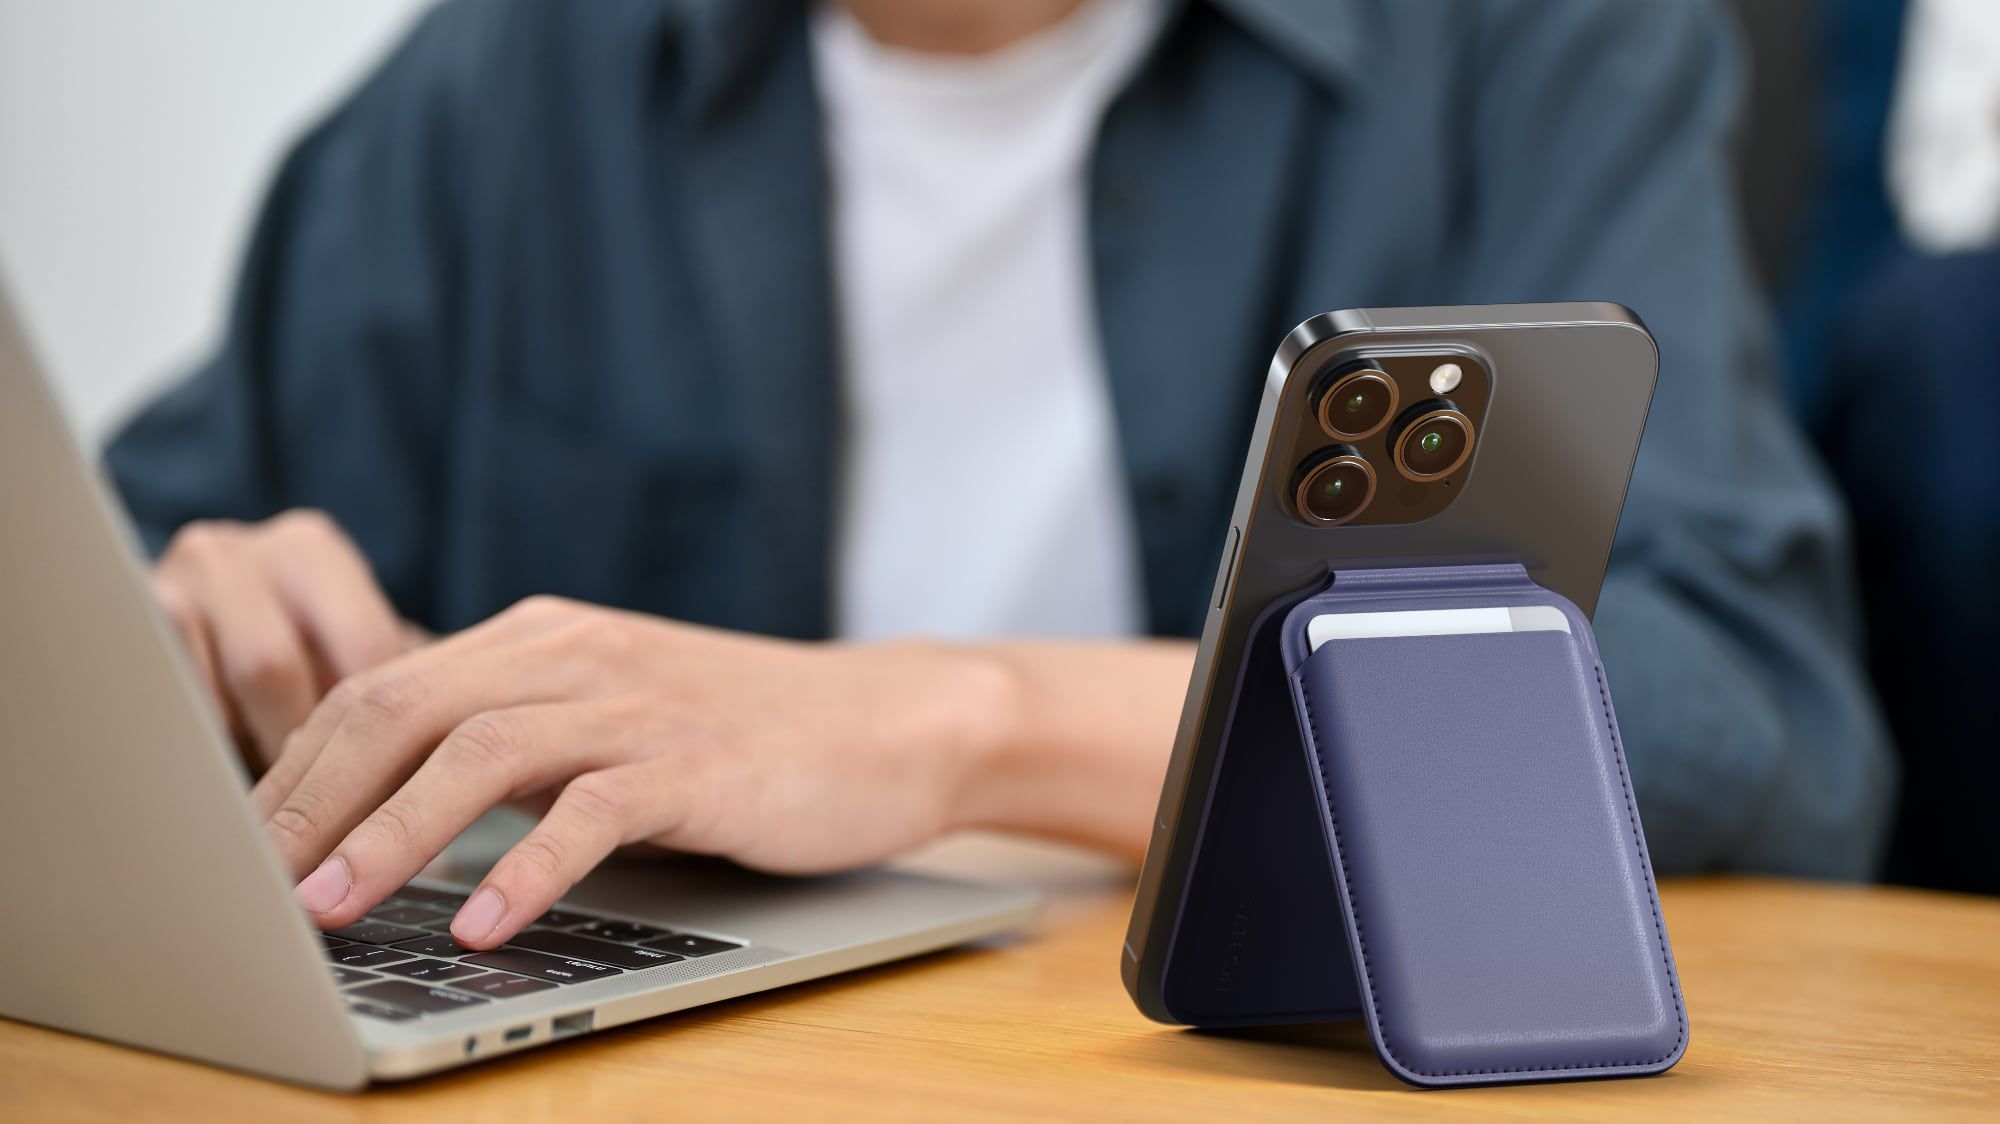 ESR Debuts MagSafe-Compatible HaloLock Geo Wallet Stand With Find